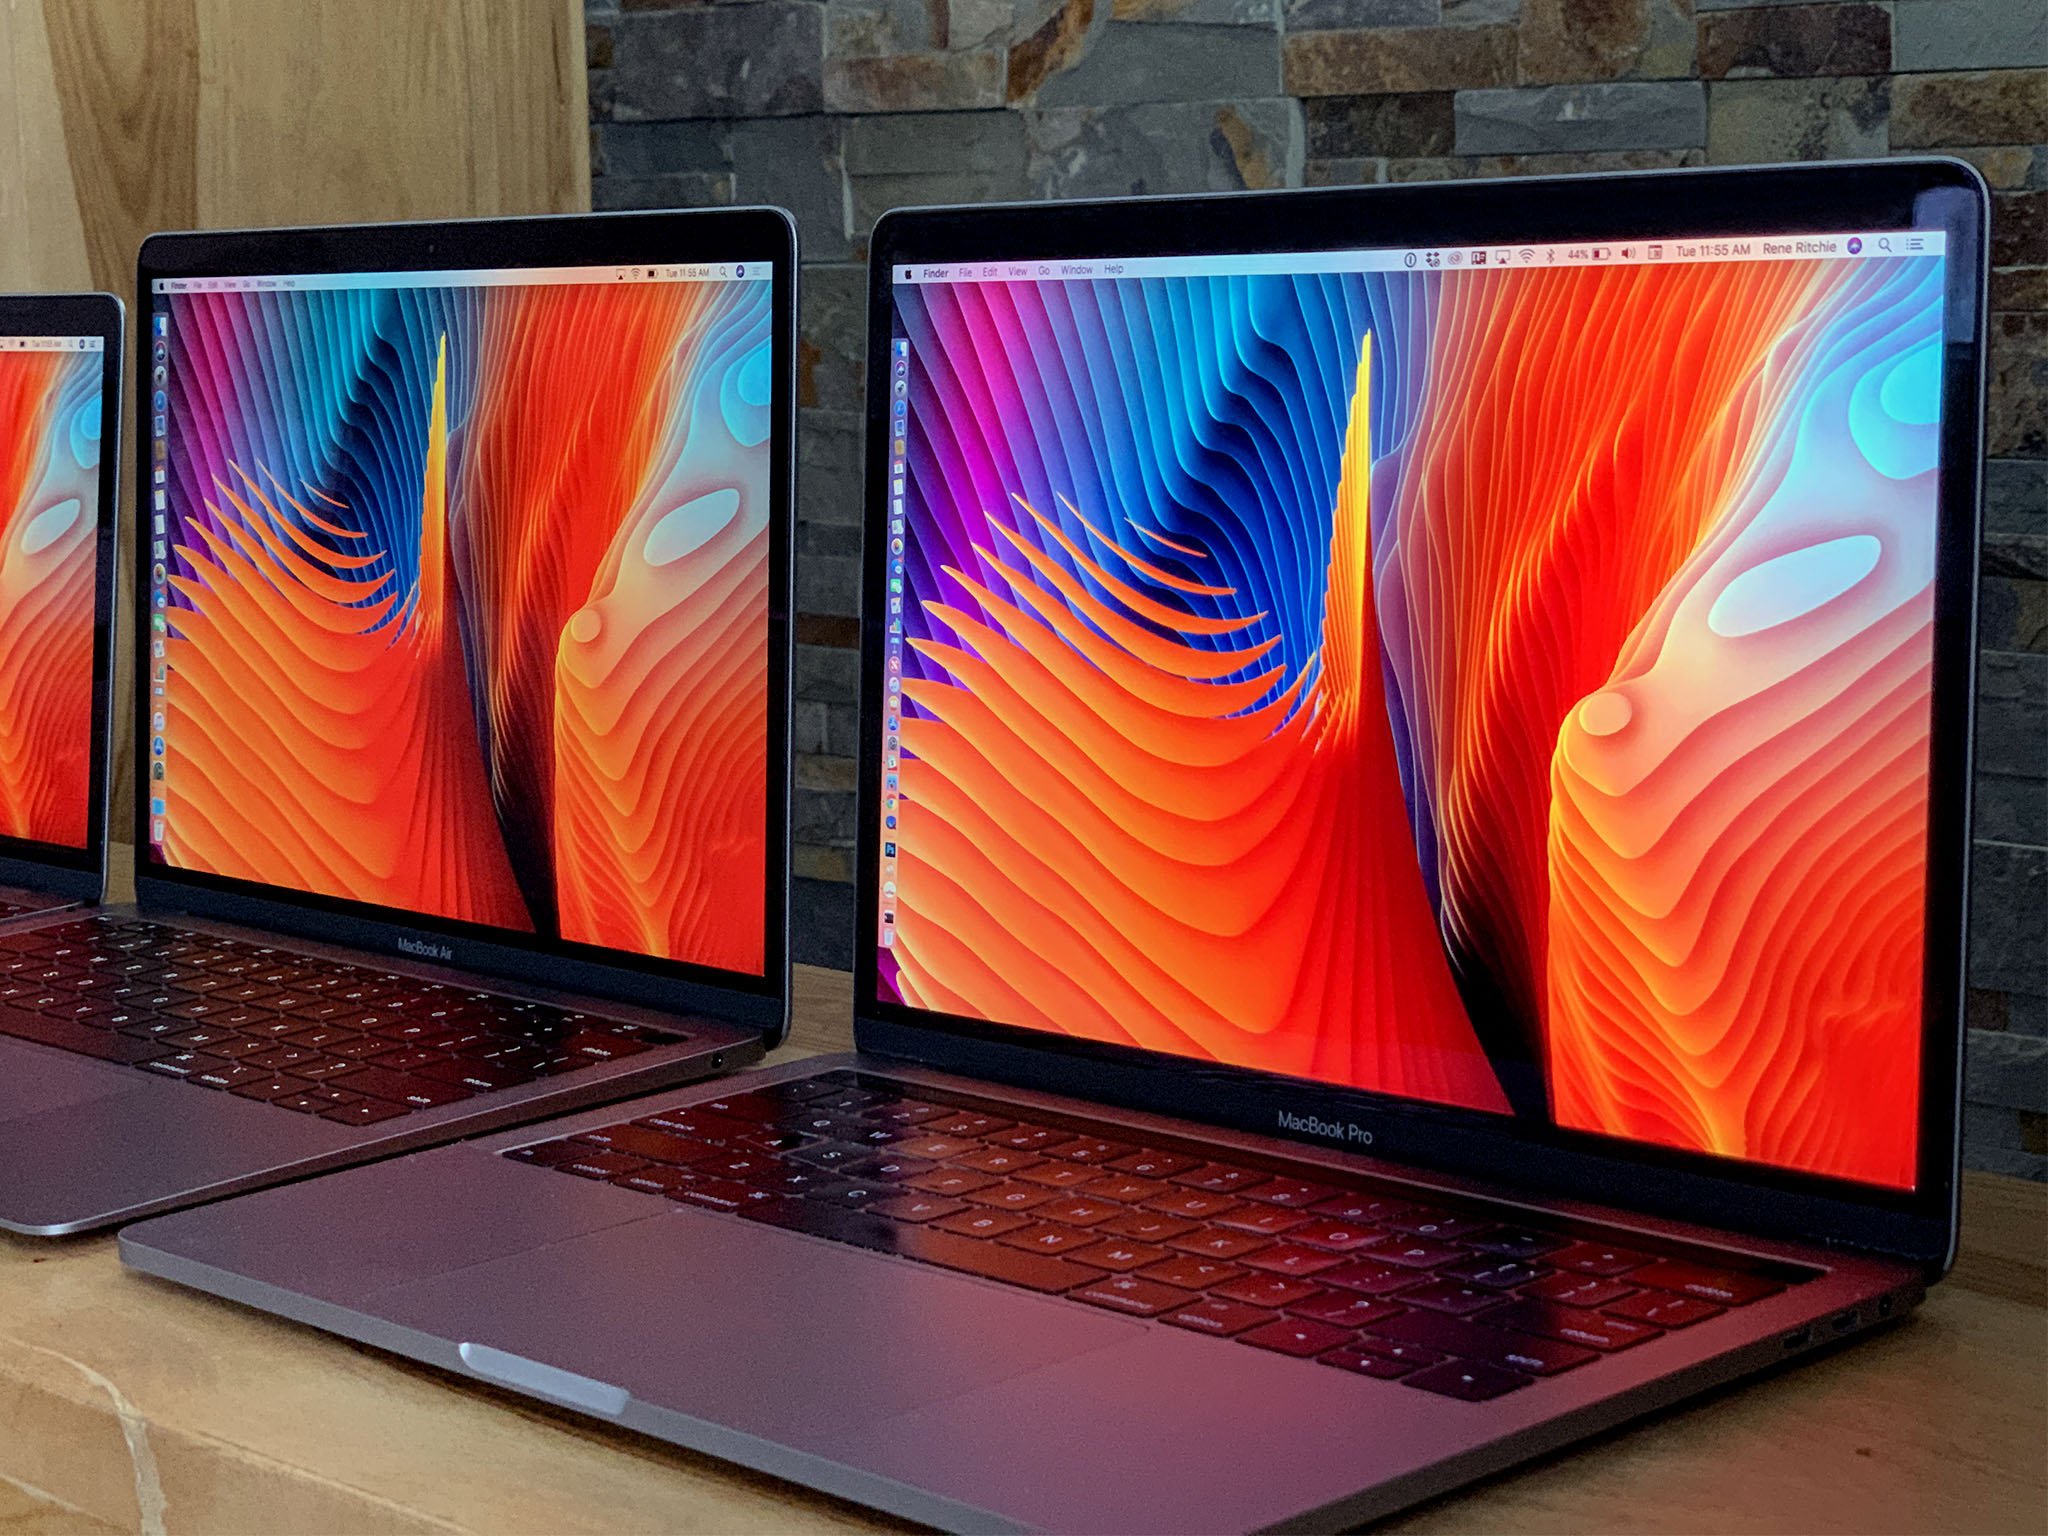 16-inch MacBook Pro reportedly launching in October starting at $3,000